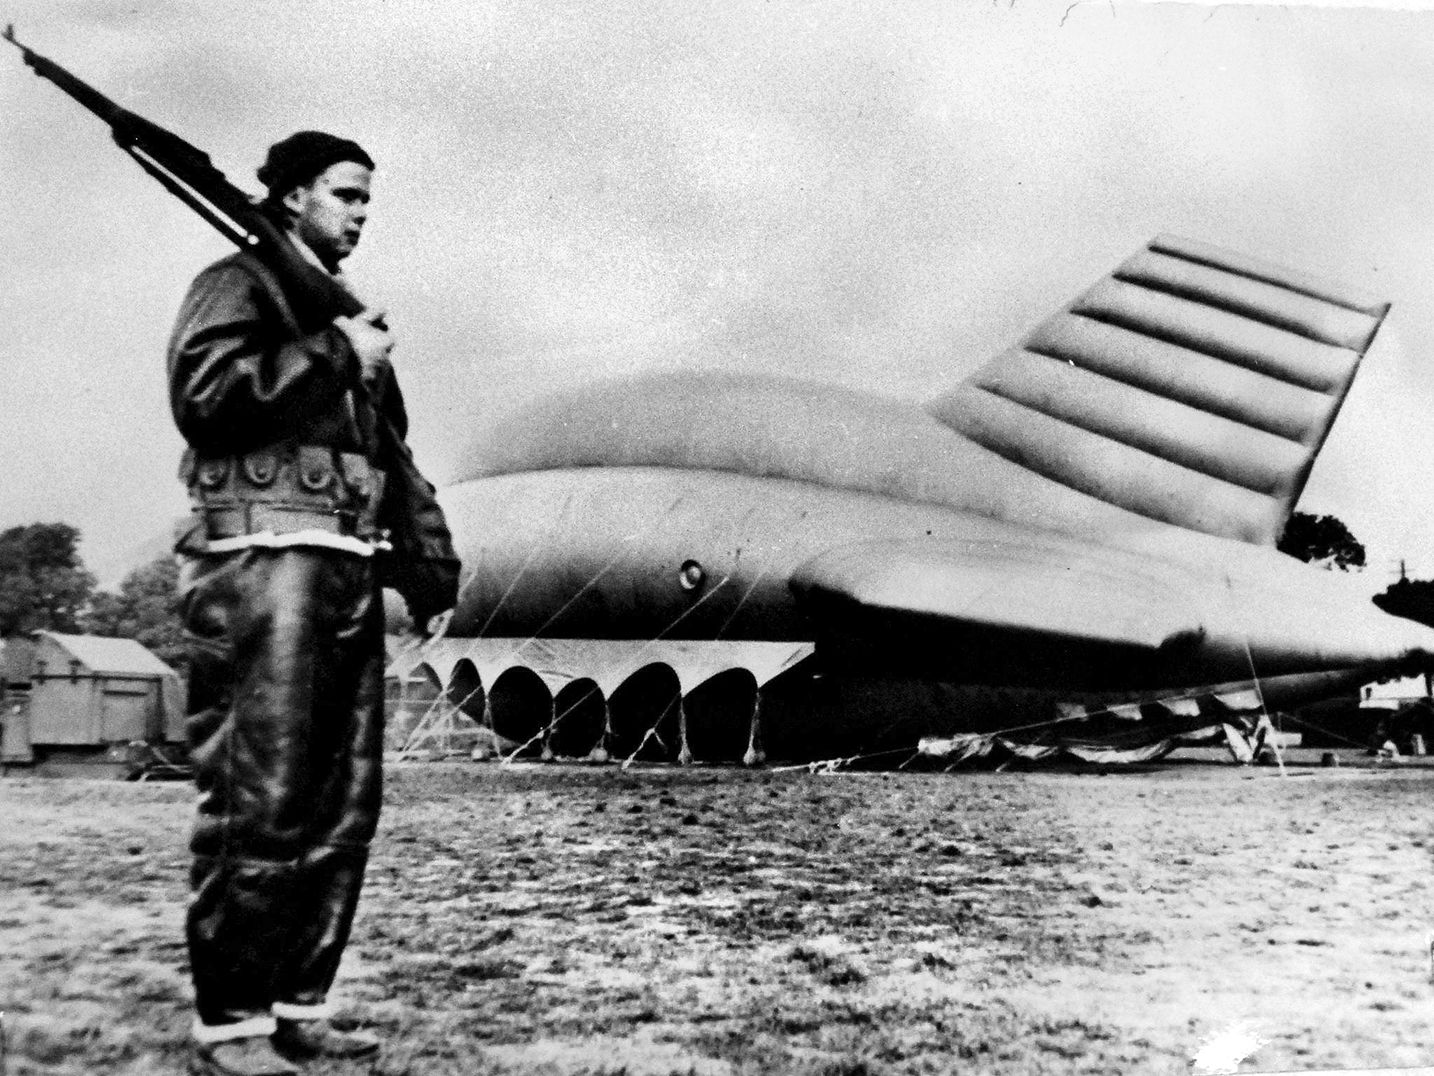 In northen California, an armed sentry in a leather flying suit guards a barrage balloon, which could be flown in case of a Japanese air attack.